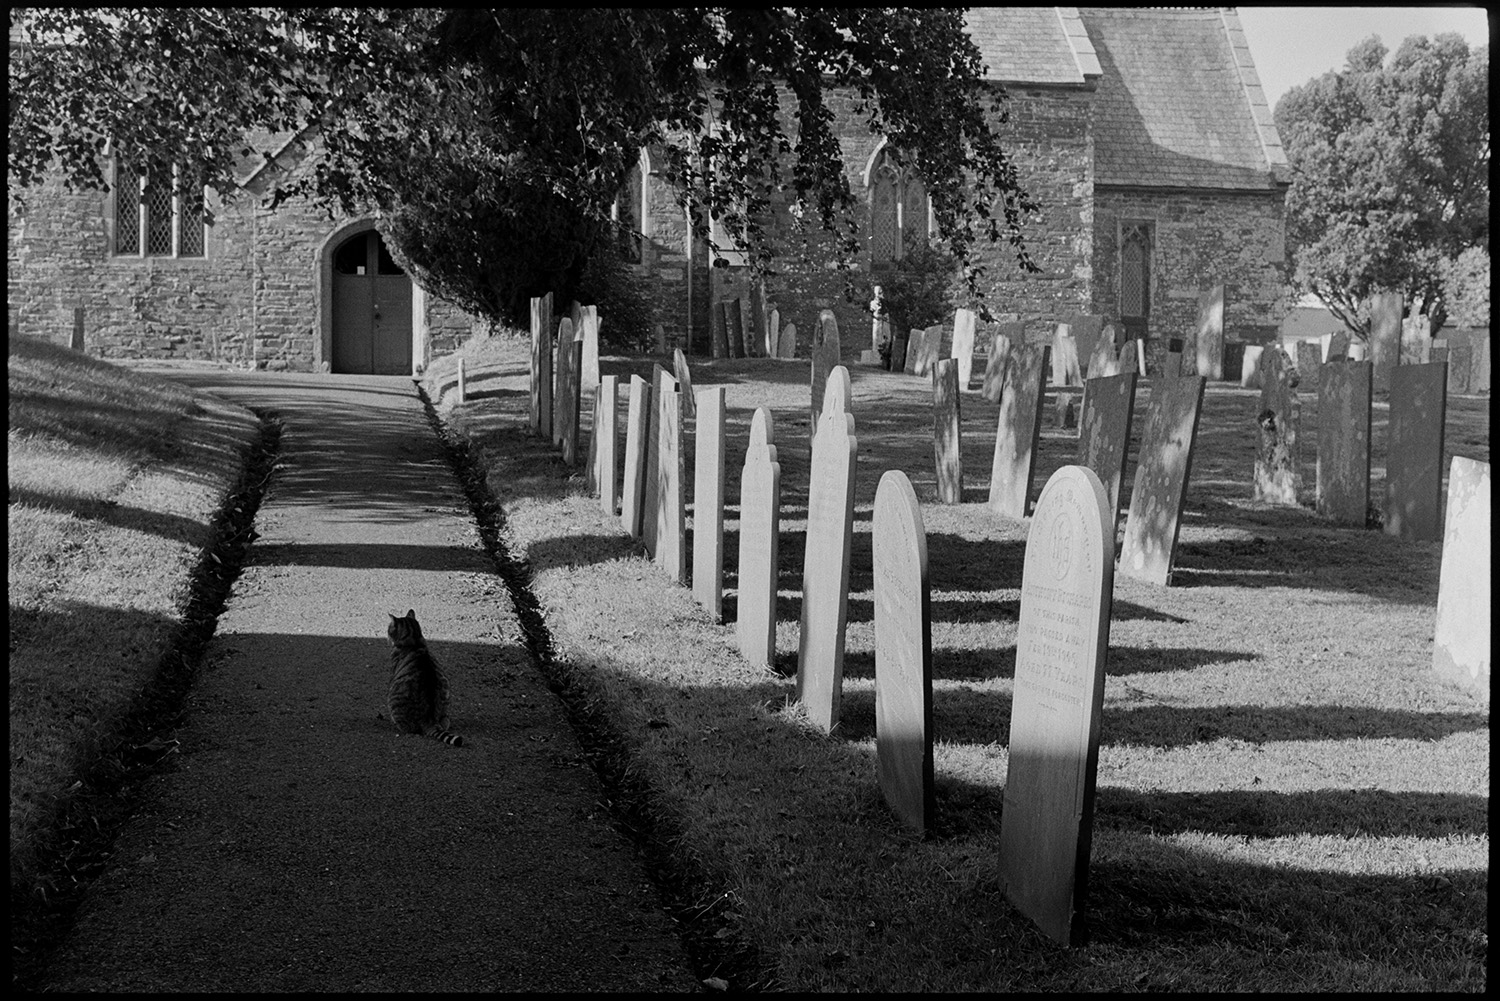 Church path with gravestones and cat.
[A cat sitting on a church path, with shadows stretching across the churchyard. Gravestones, part of the church and yew trees are visible.]